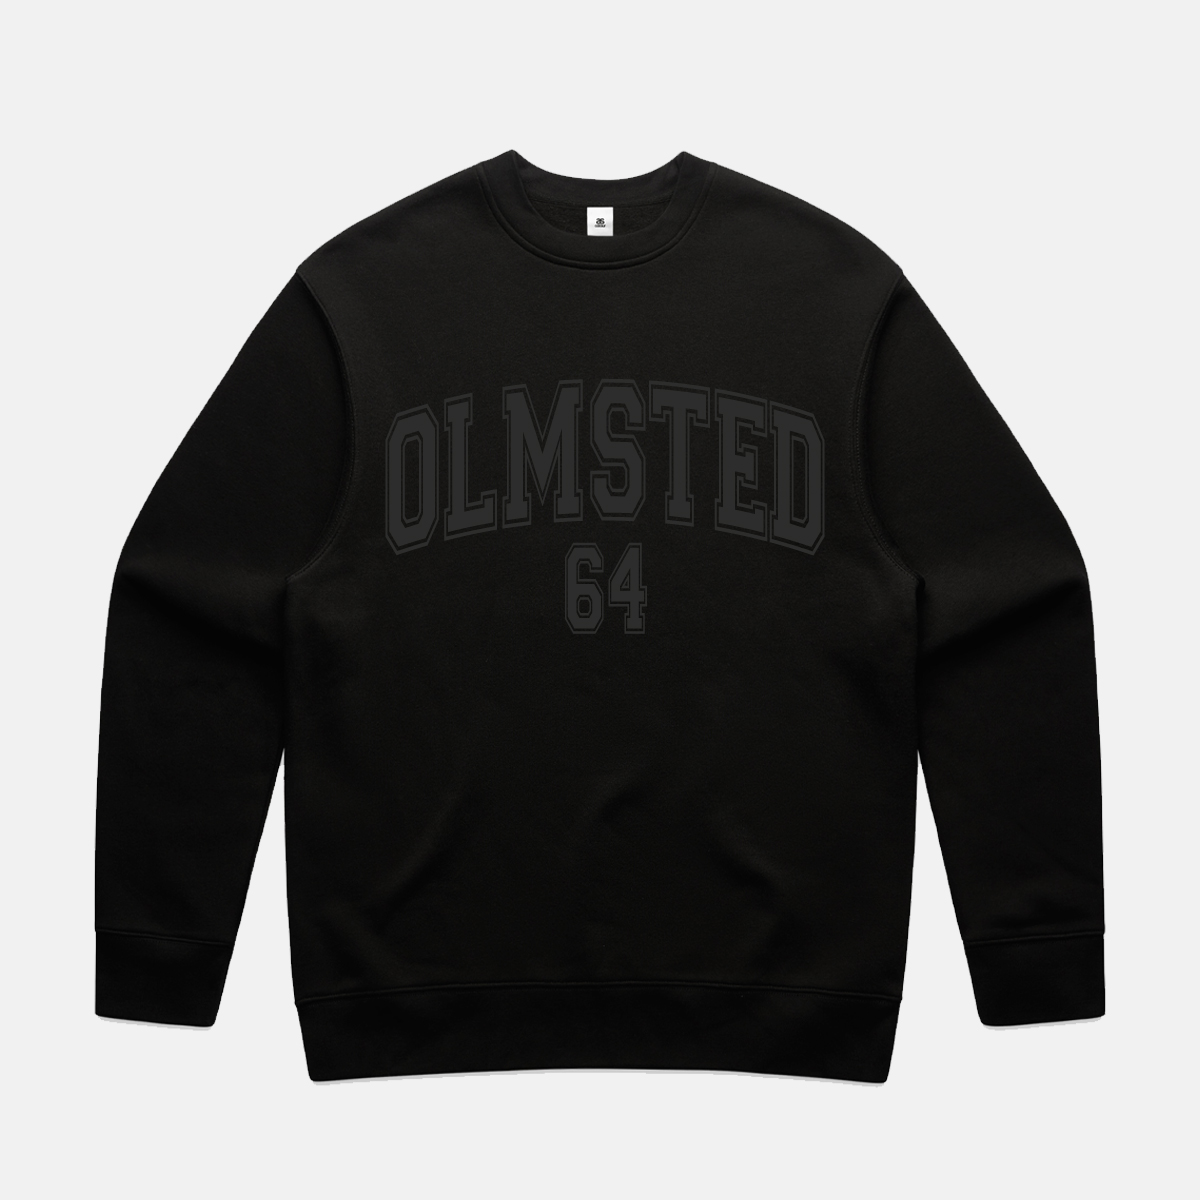 Olmsted 64 Blackout Sweater